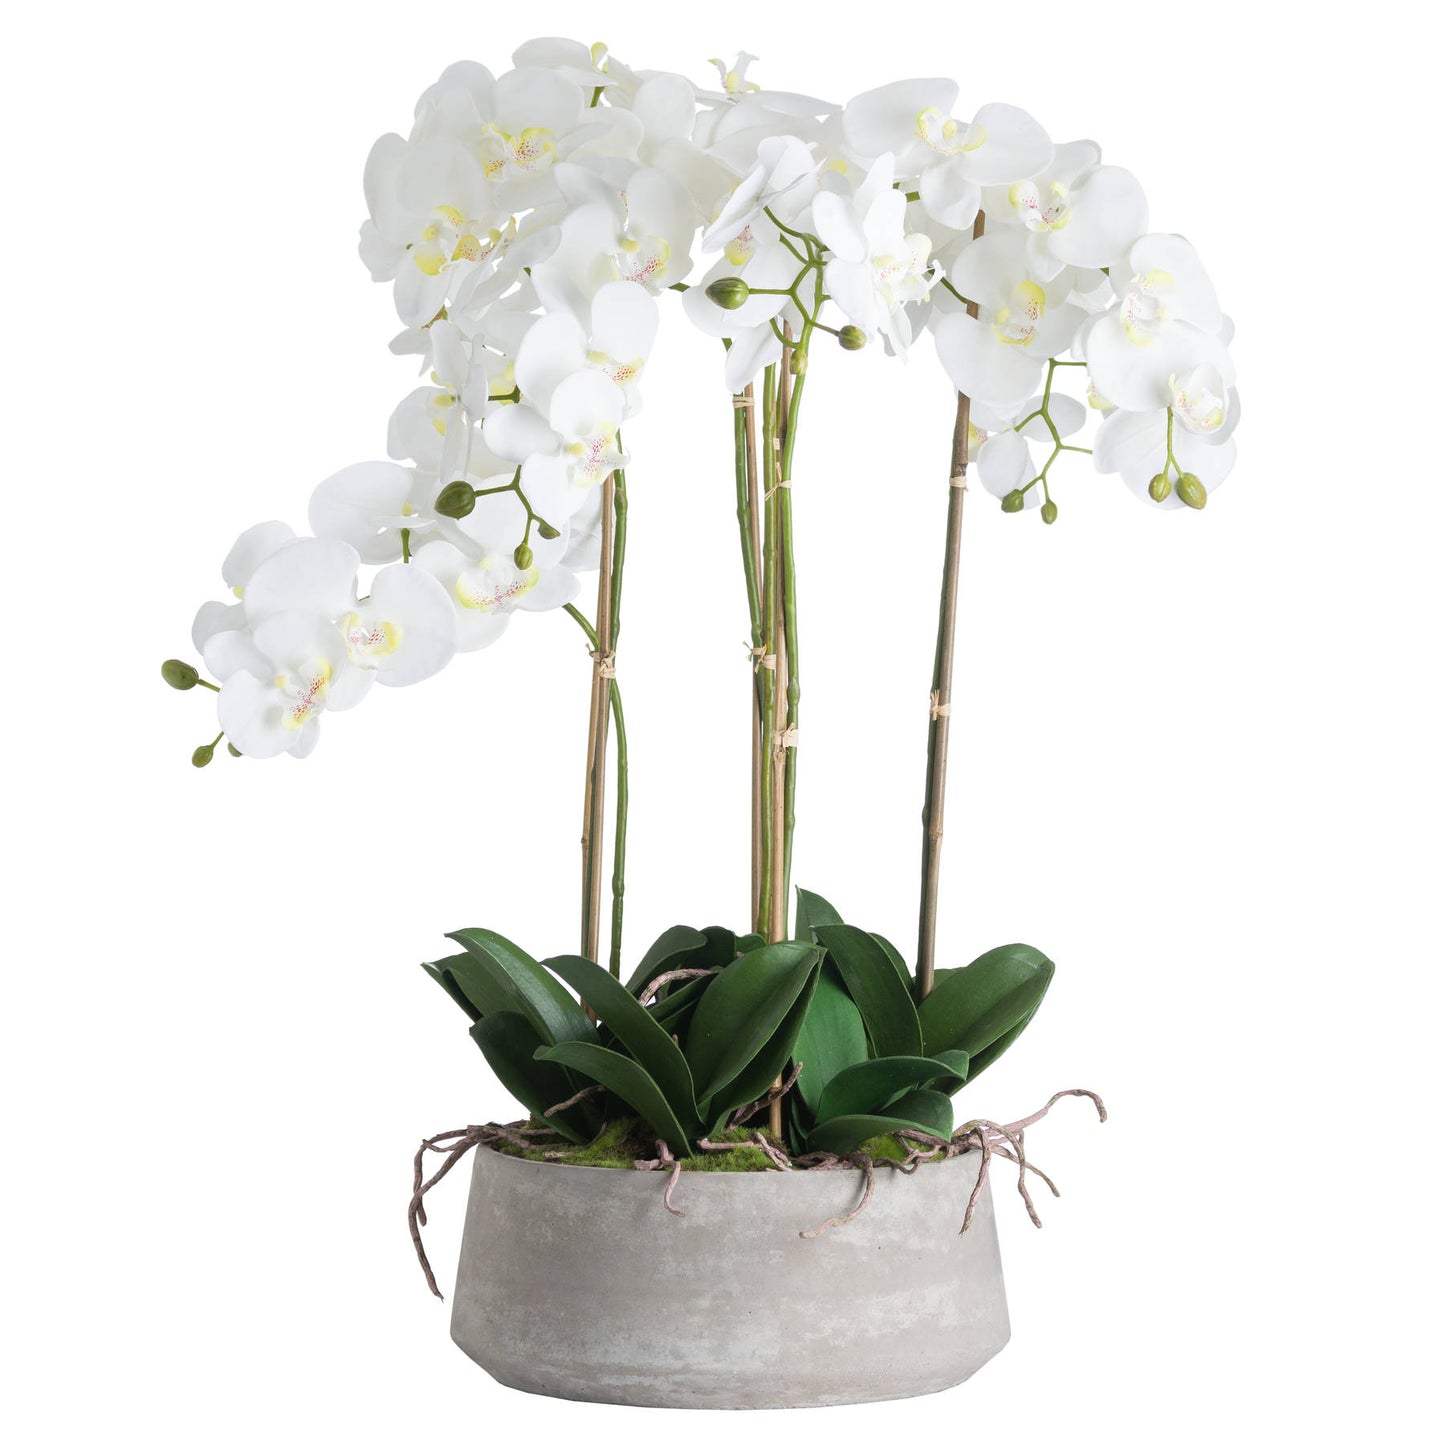 Orchid In Stone Pot